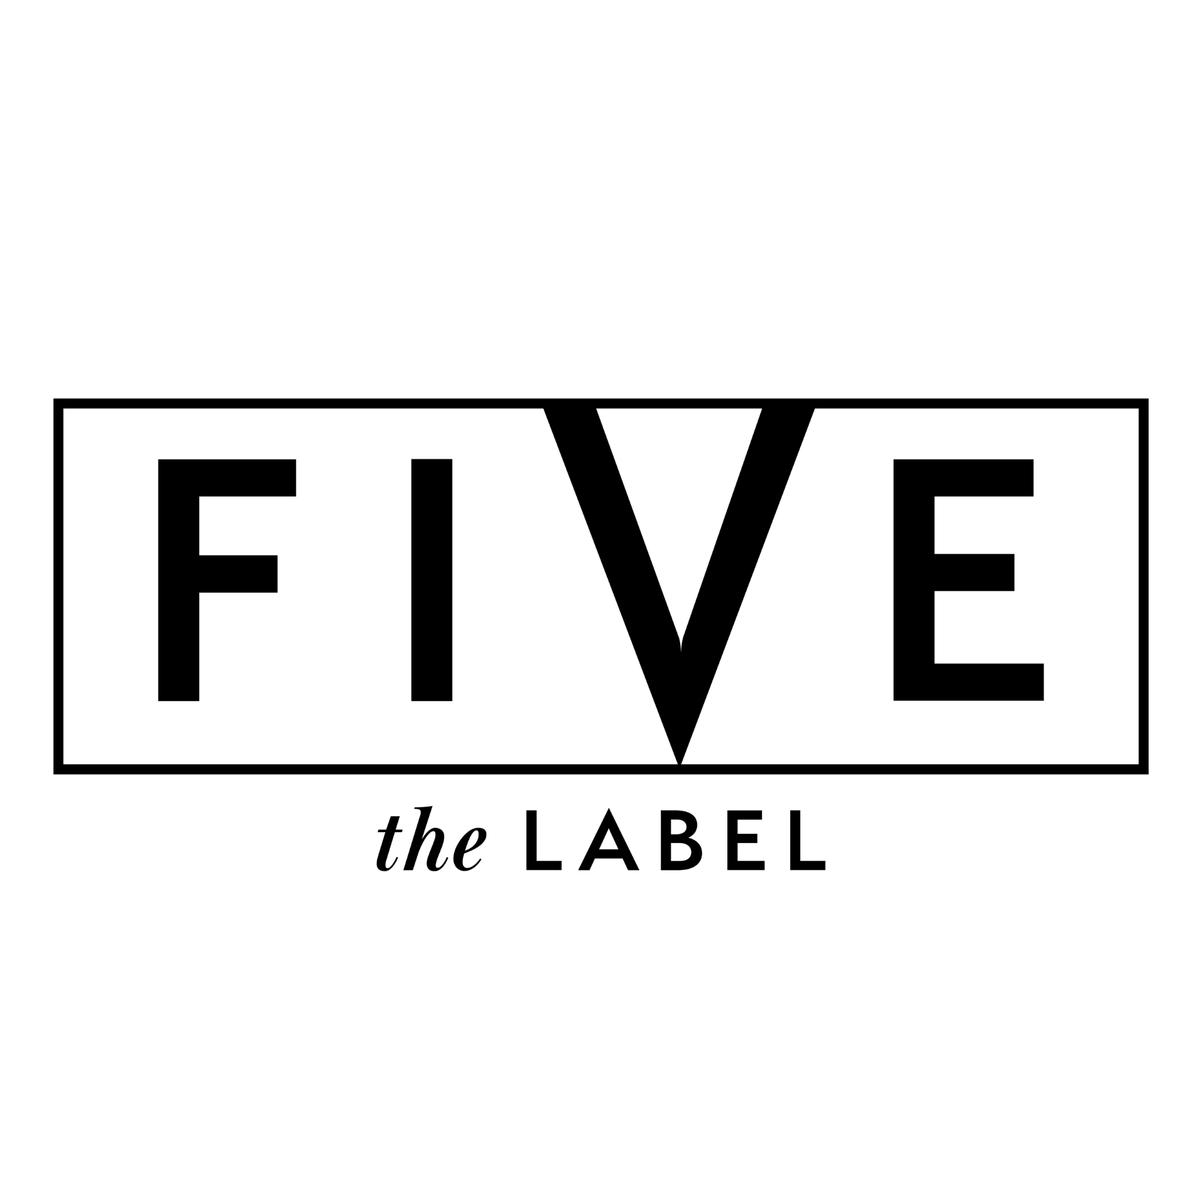 Five The Label's images